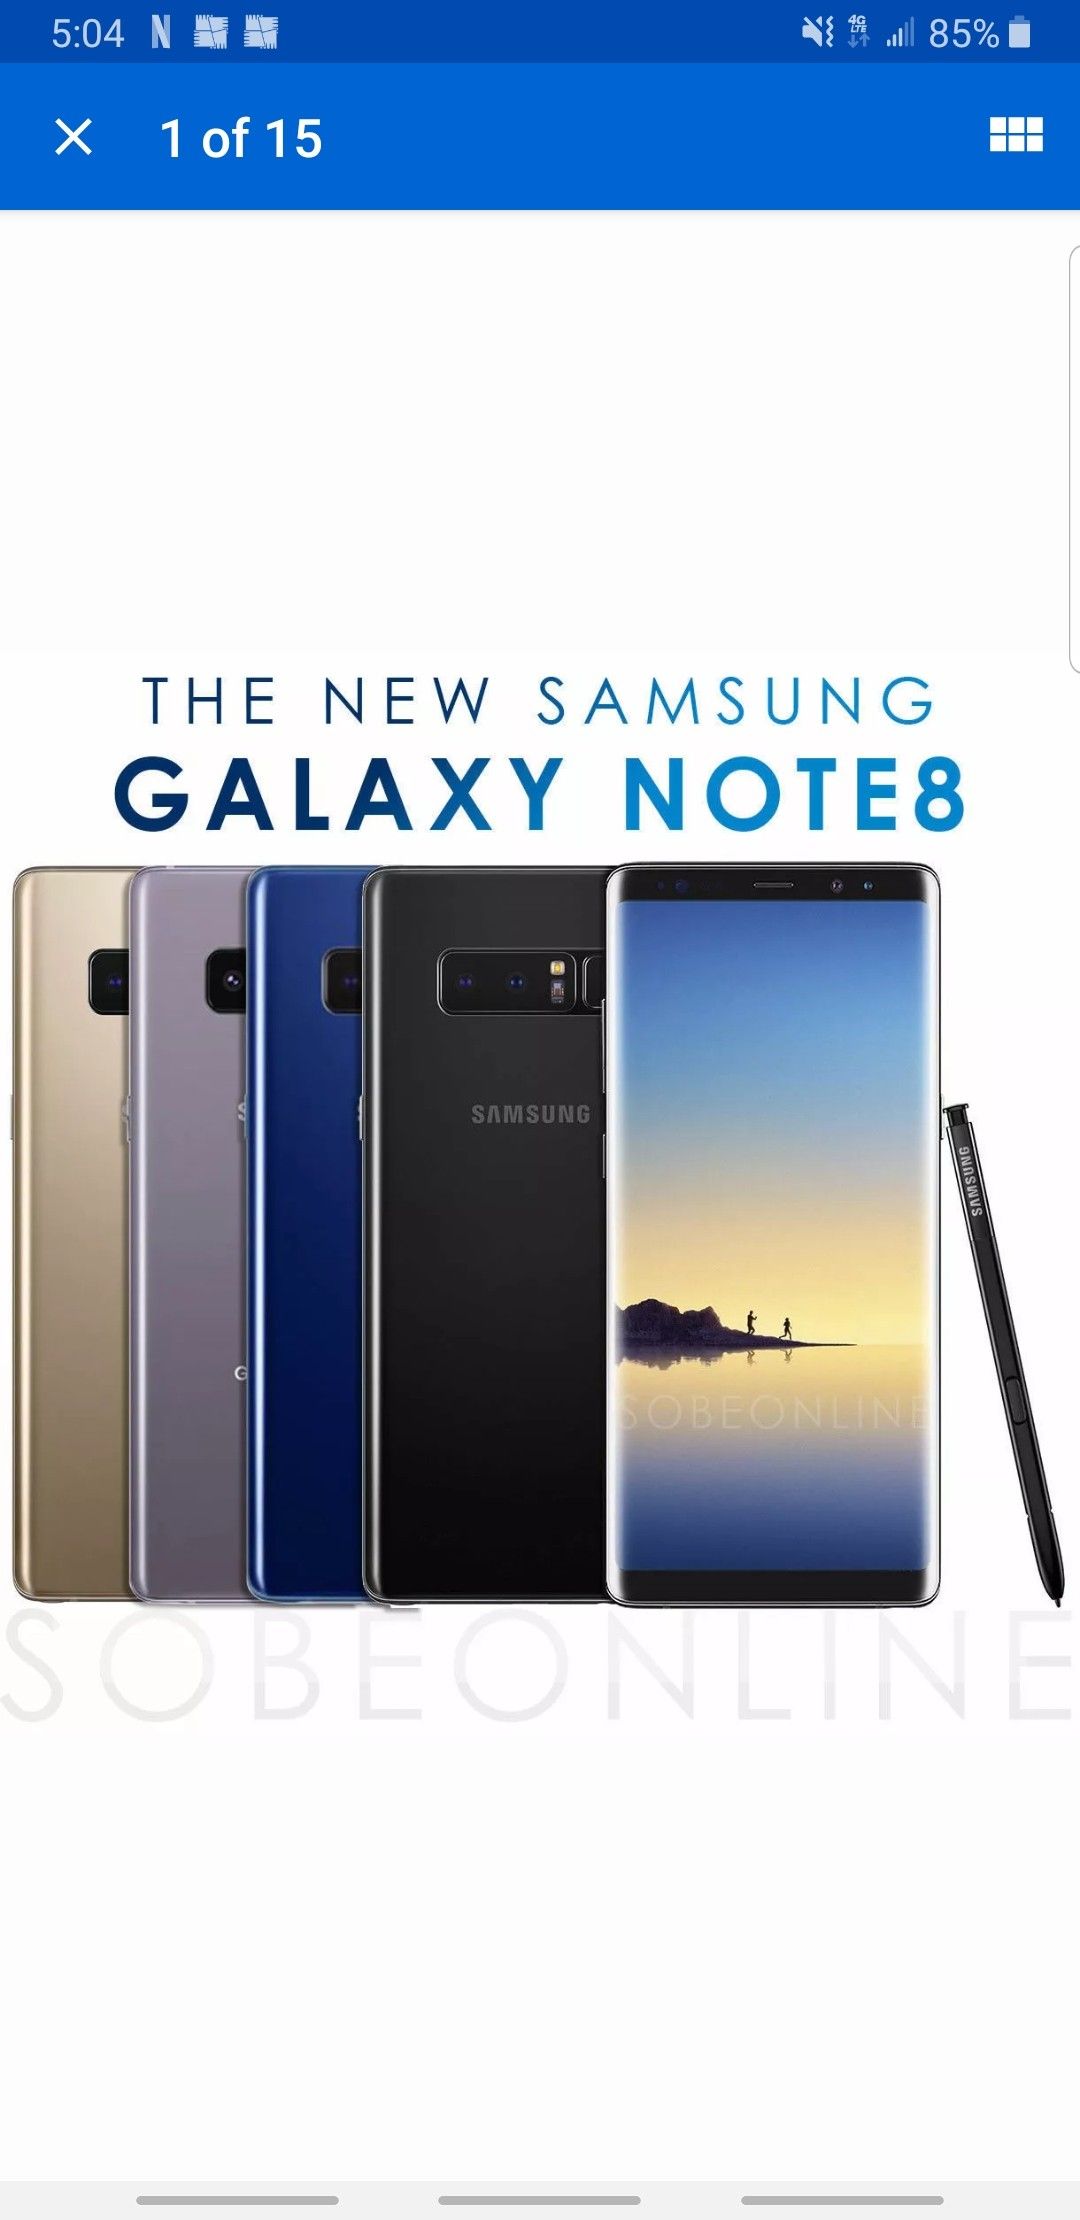 Samsung Galaxy Note 8 (unlocked) T-Mobile Phone